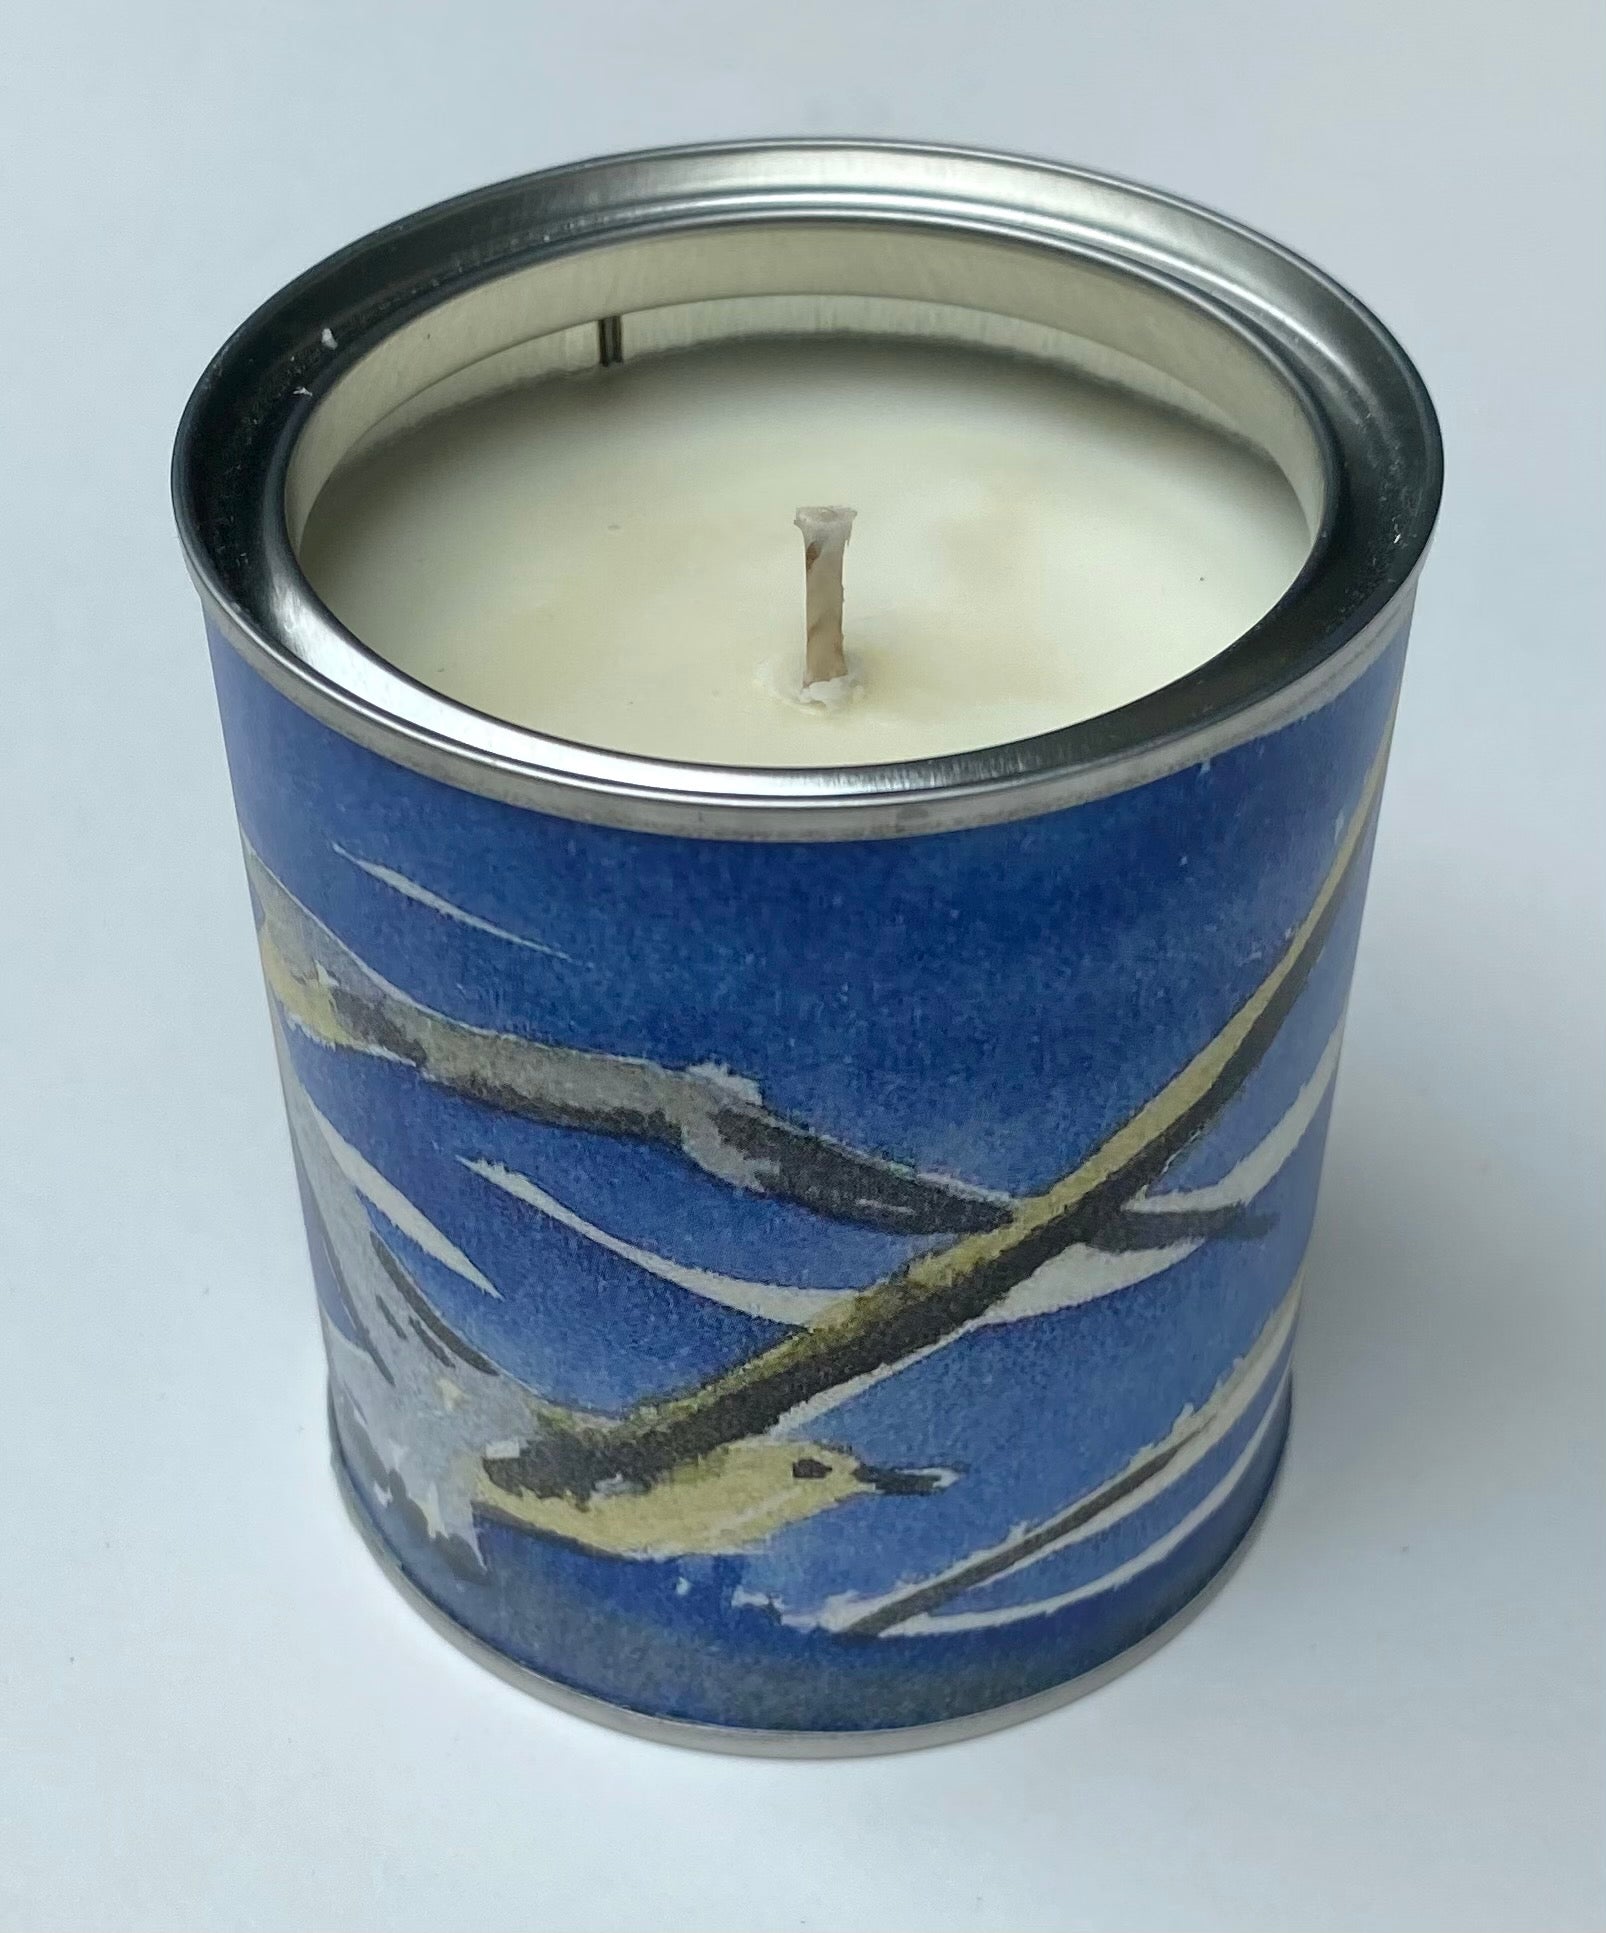 handmade candle tin with a watercolour picture of gulls